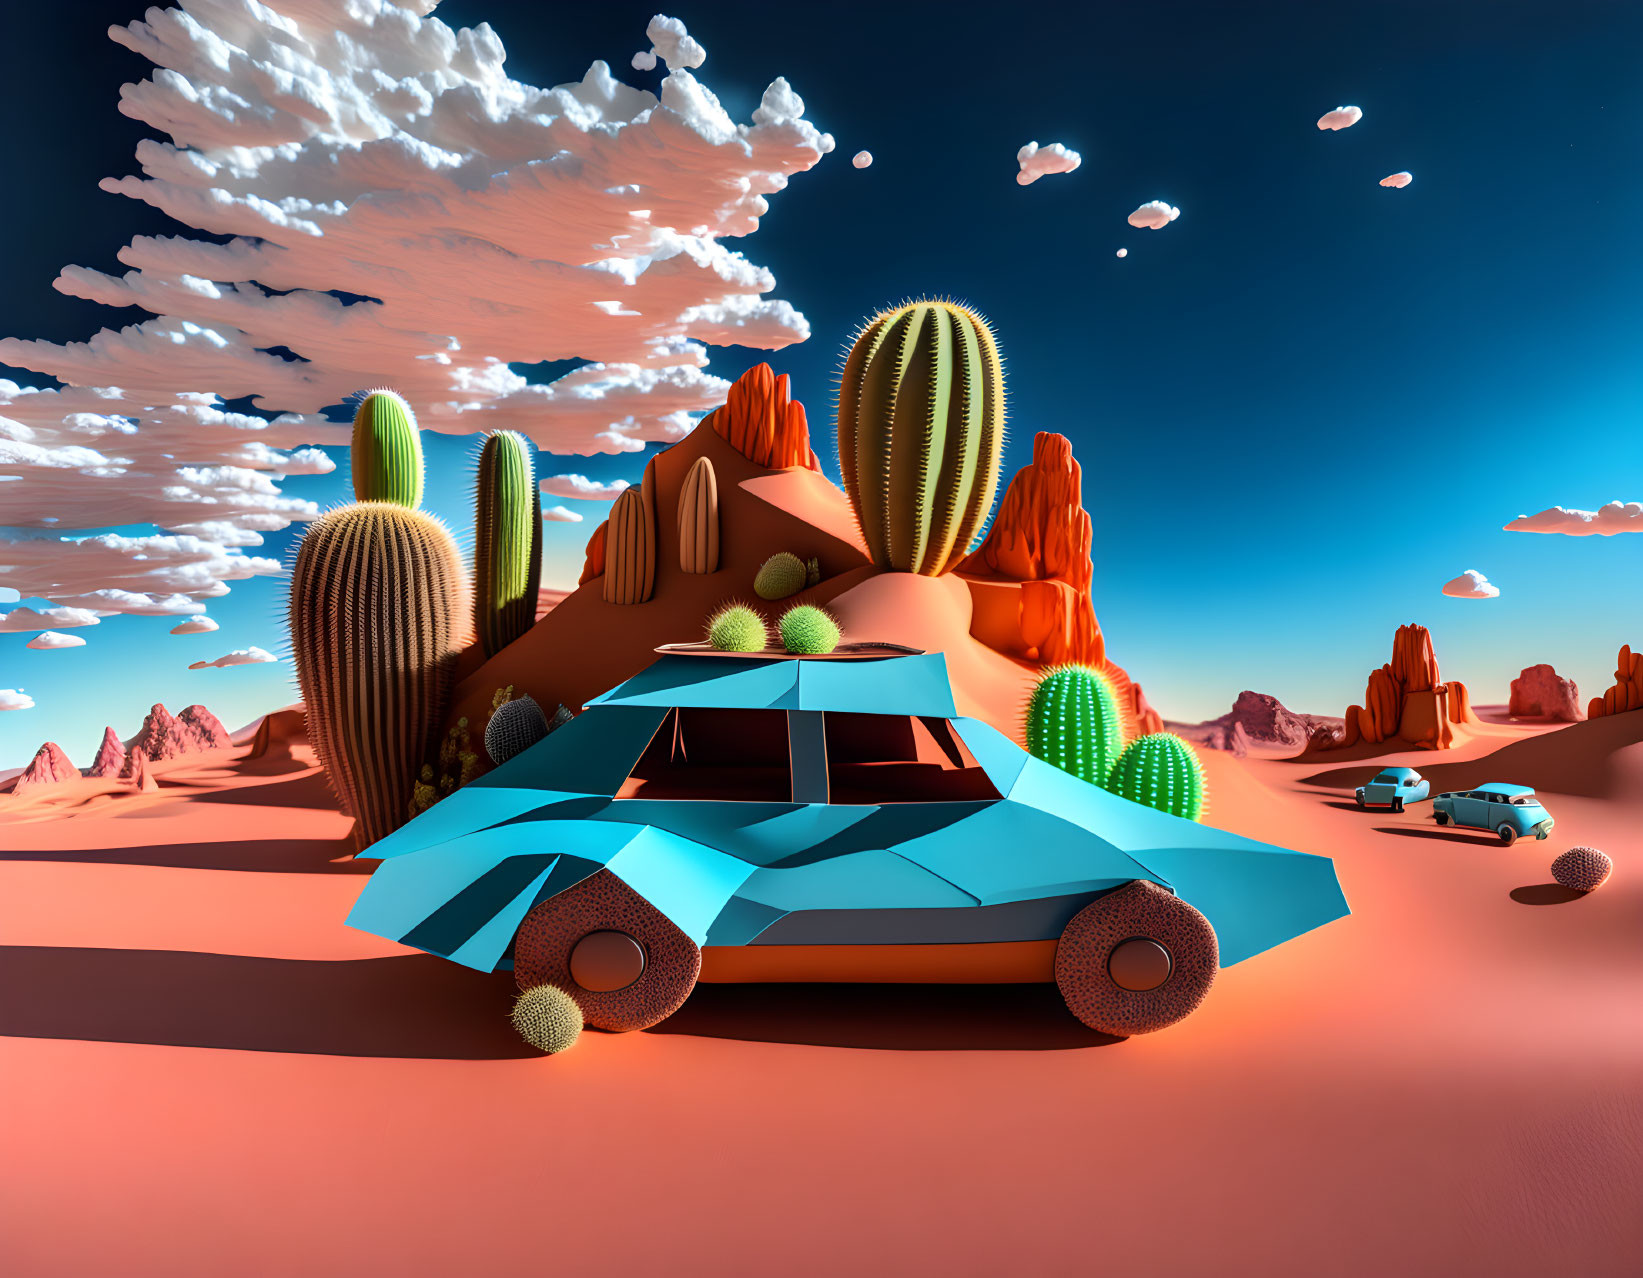 Blue geometric car in desert with cacti, rocks, and clouds